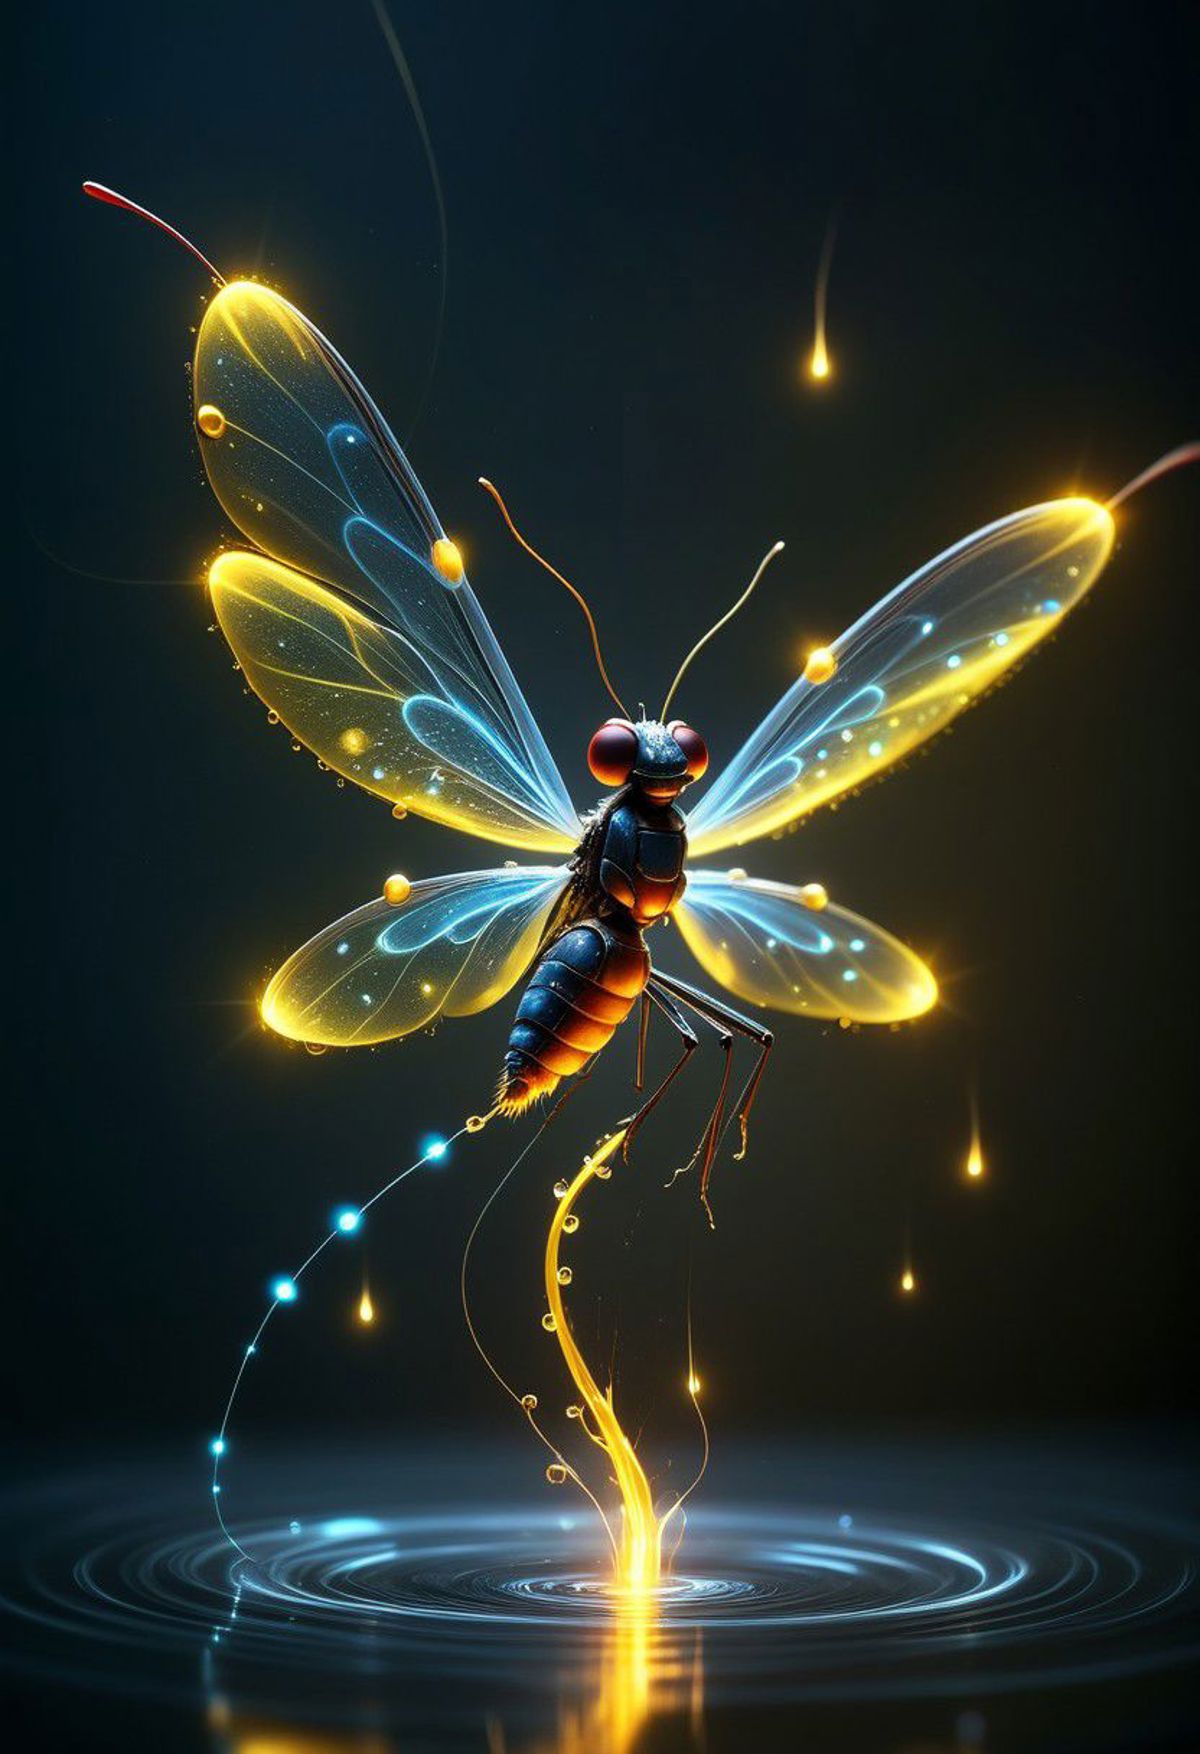 A beautifully lit up dragonfly on display.